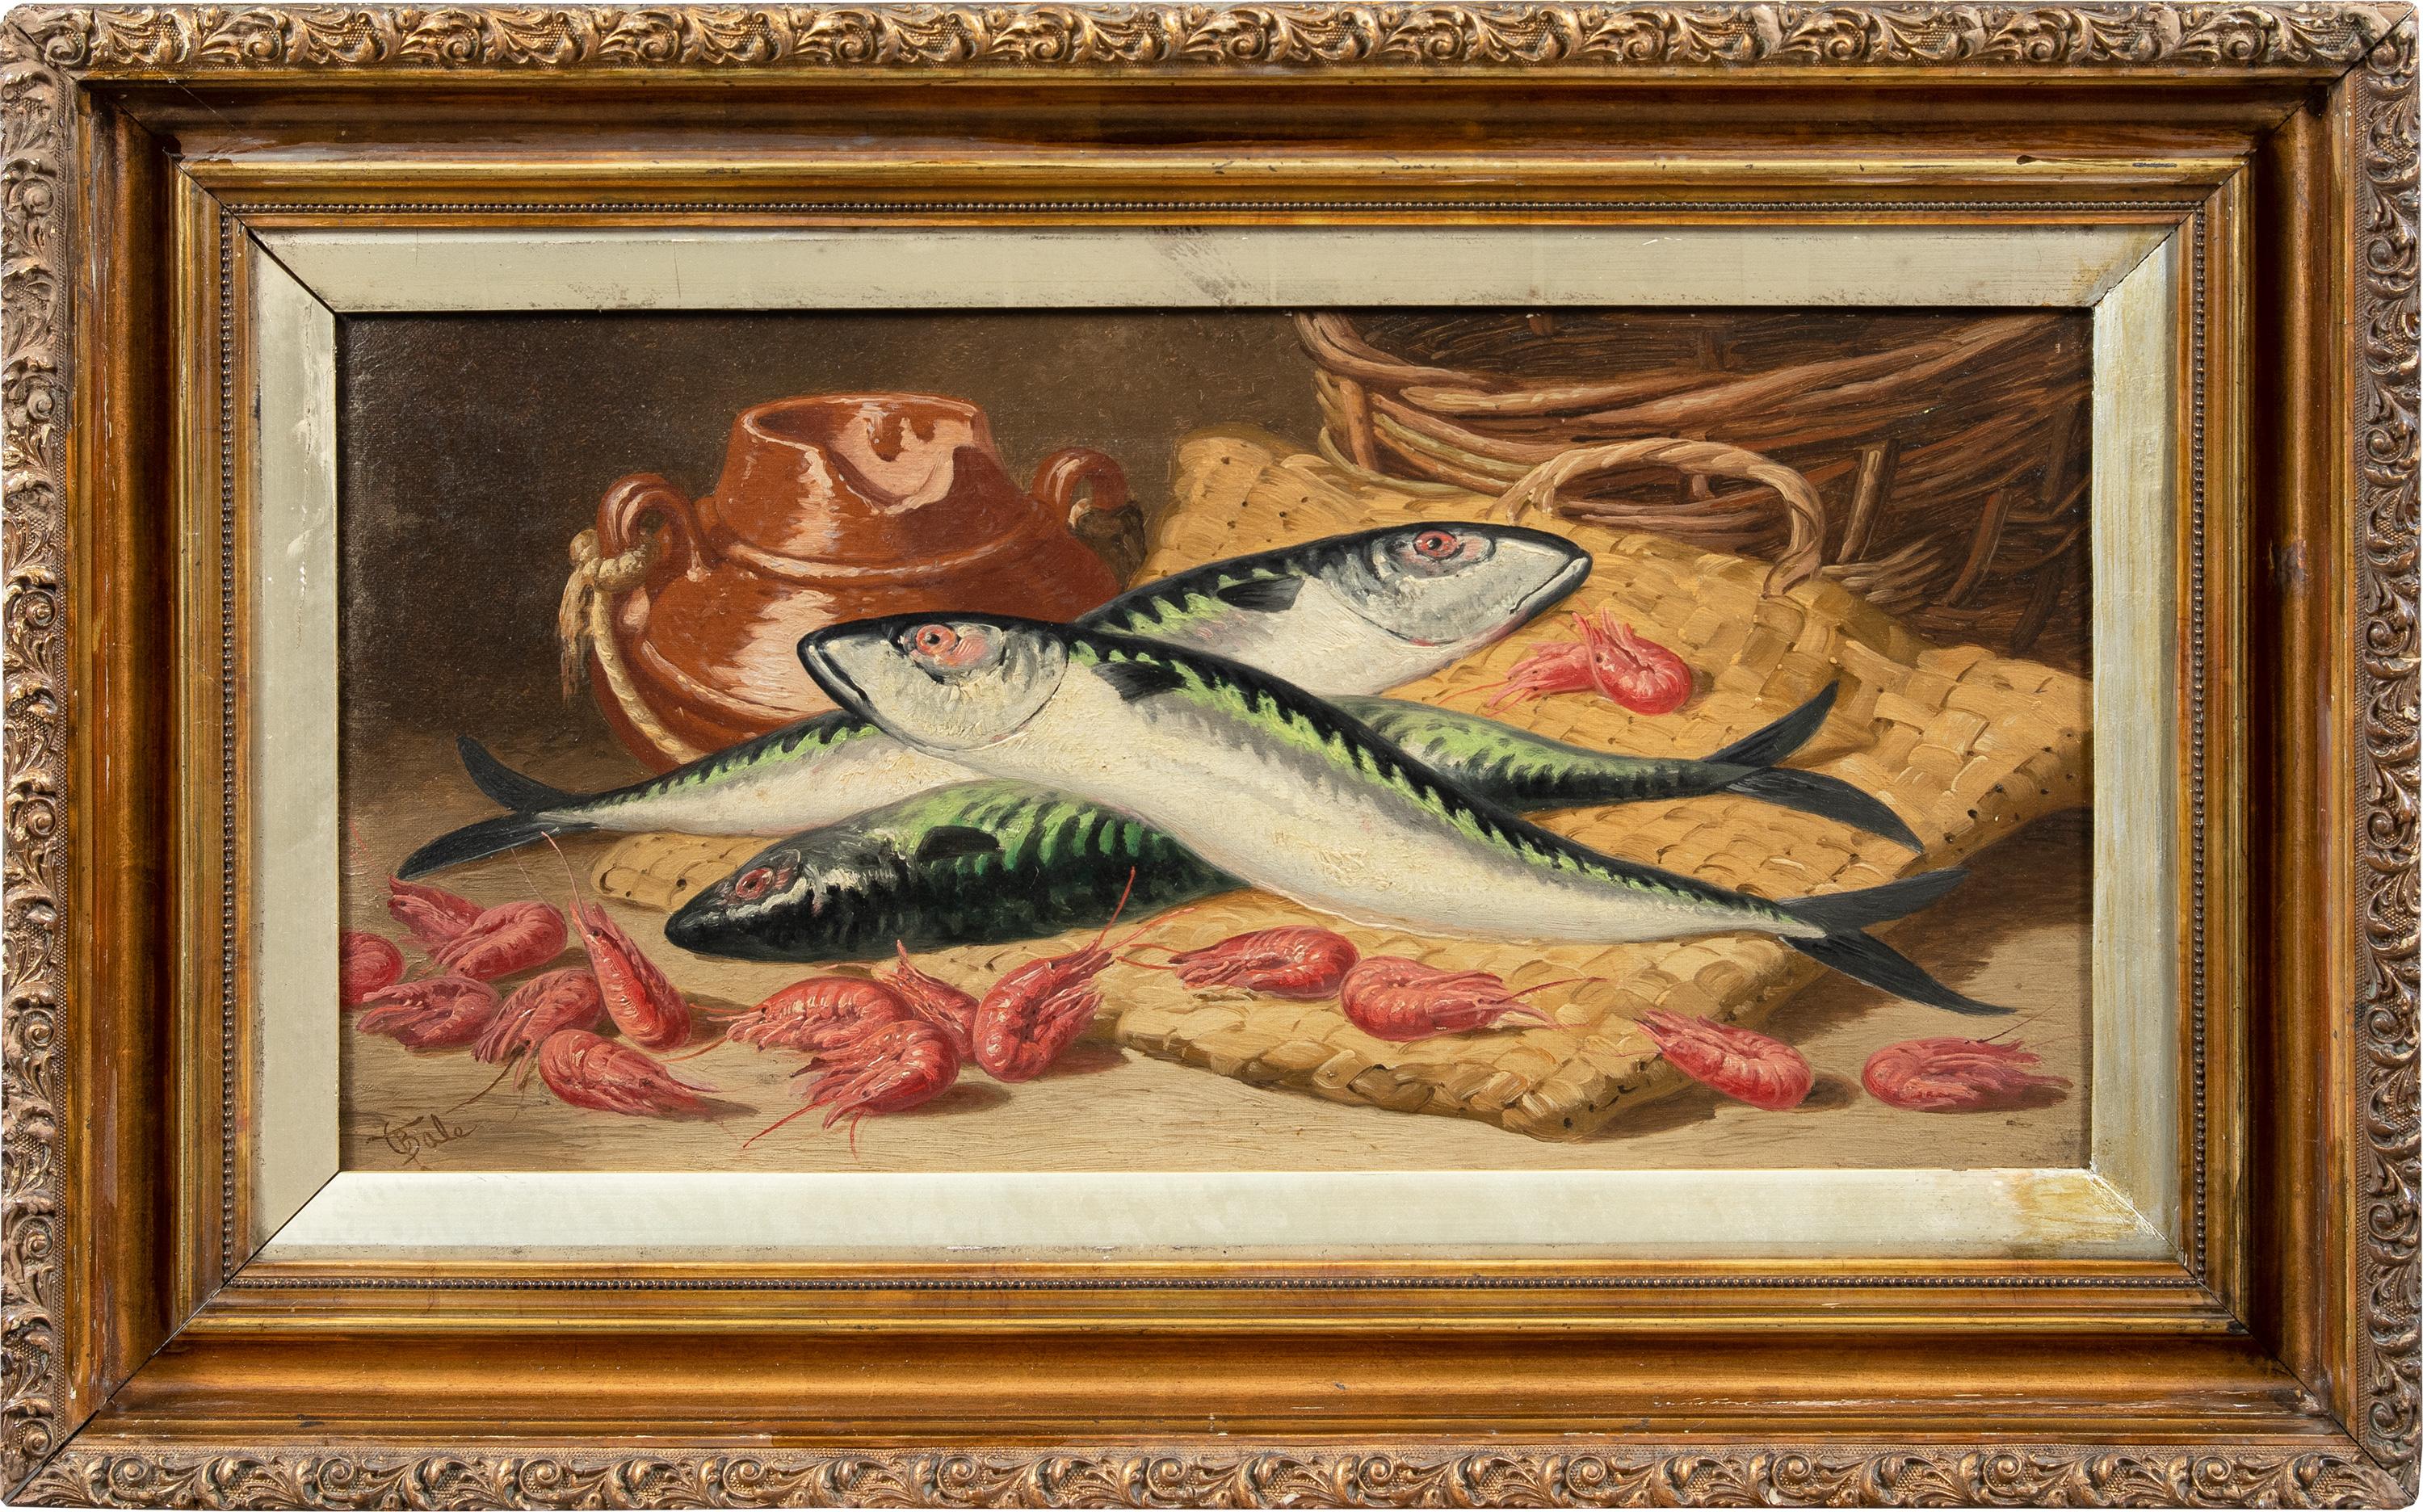 Charles Bale (British) - 19th century still life painting - Fish and shrimp - Painting by Unknown